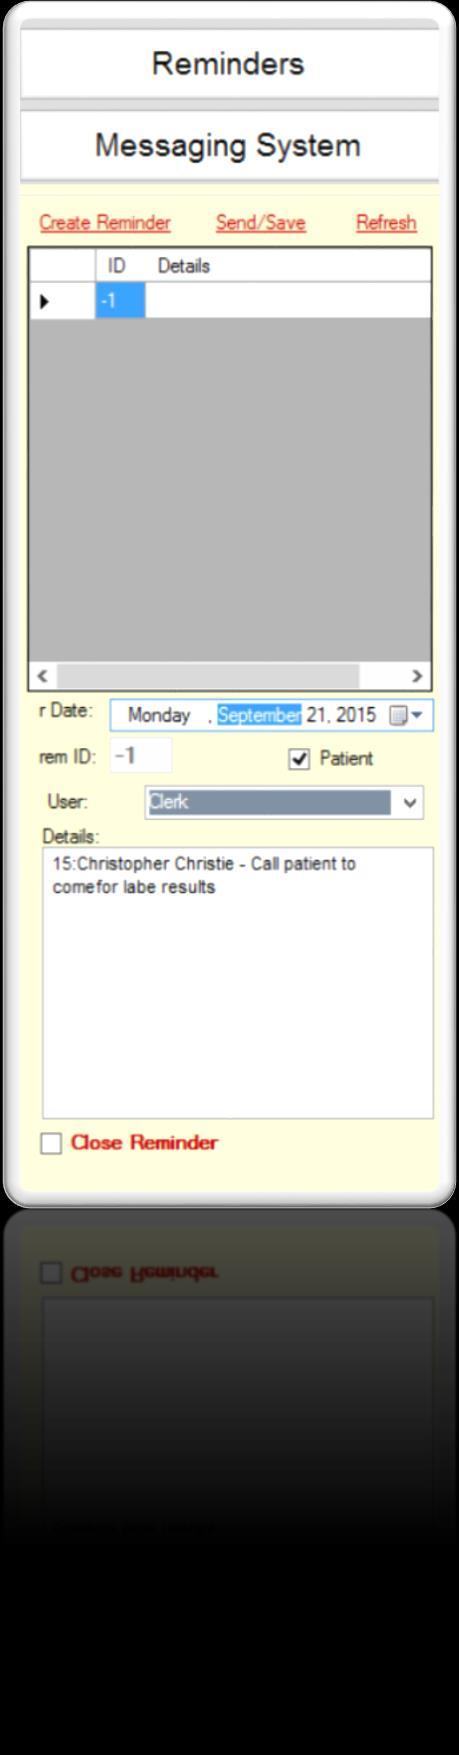 Creating Reminders for Staff There are times when the medical office needs to make contact with a patient in the future for medical reasons.